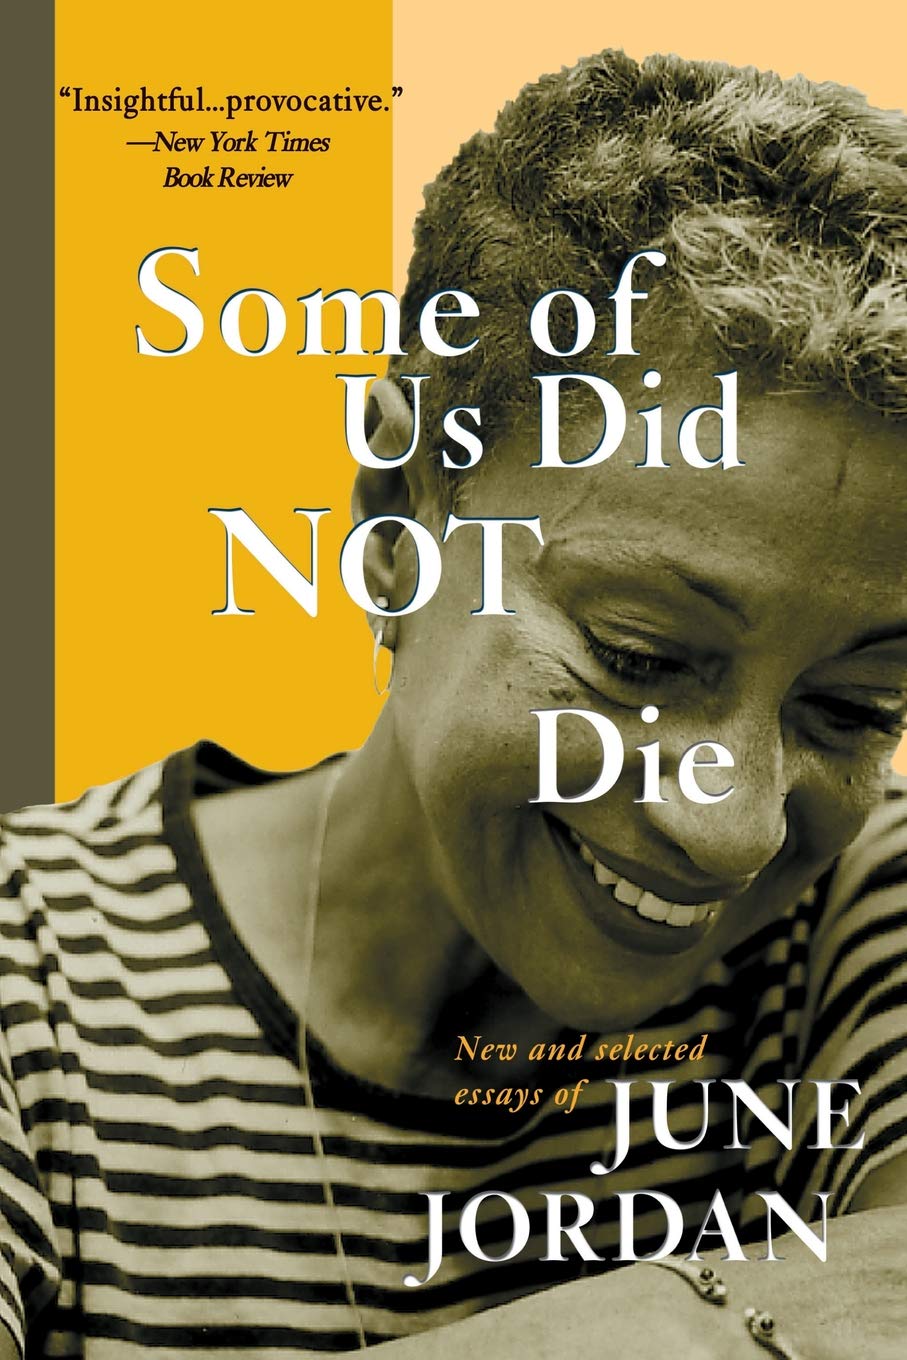 Some of Us Did Not Die // New and Selected Essays